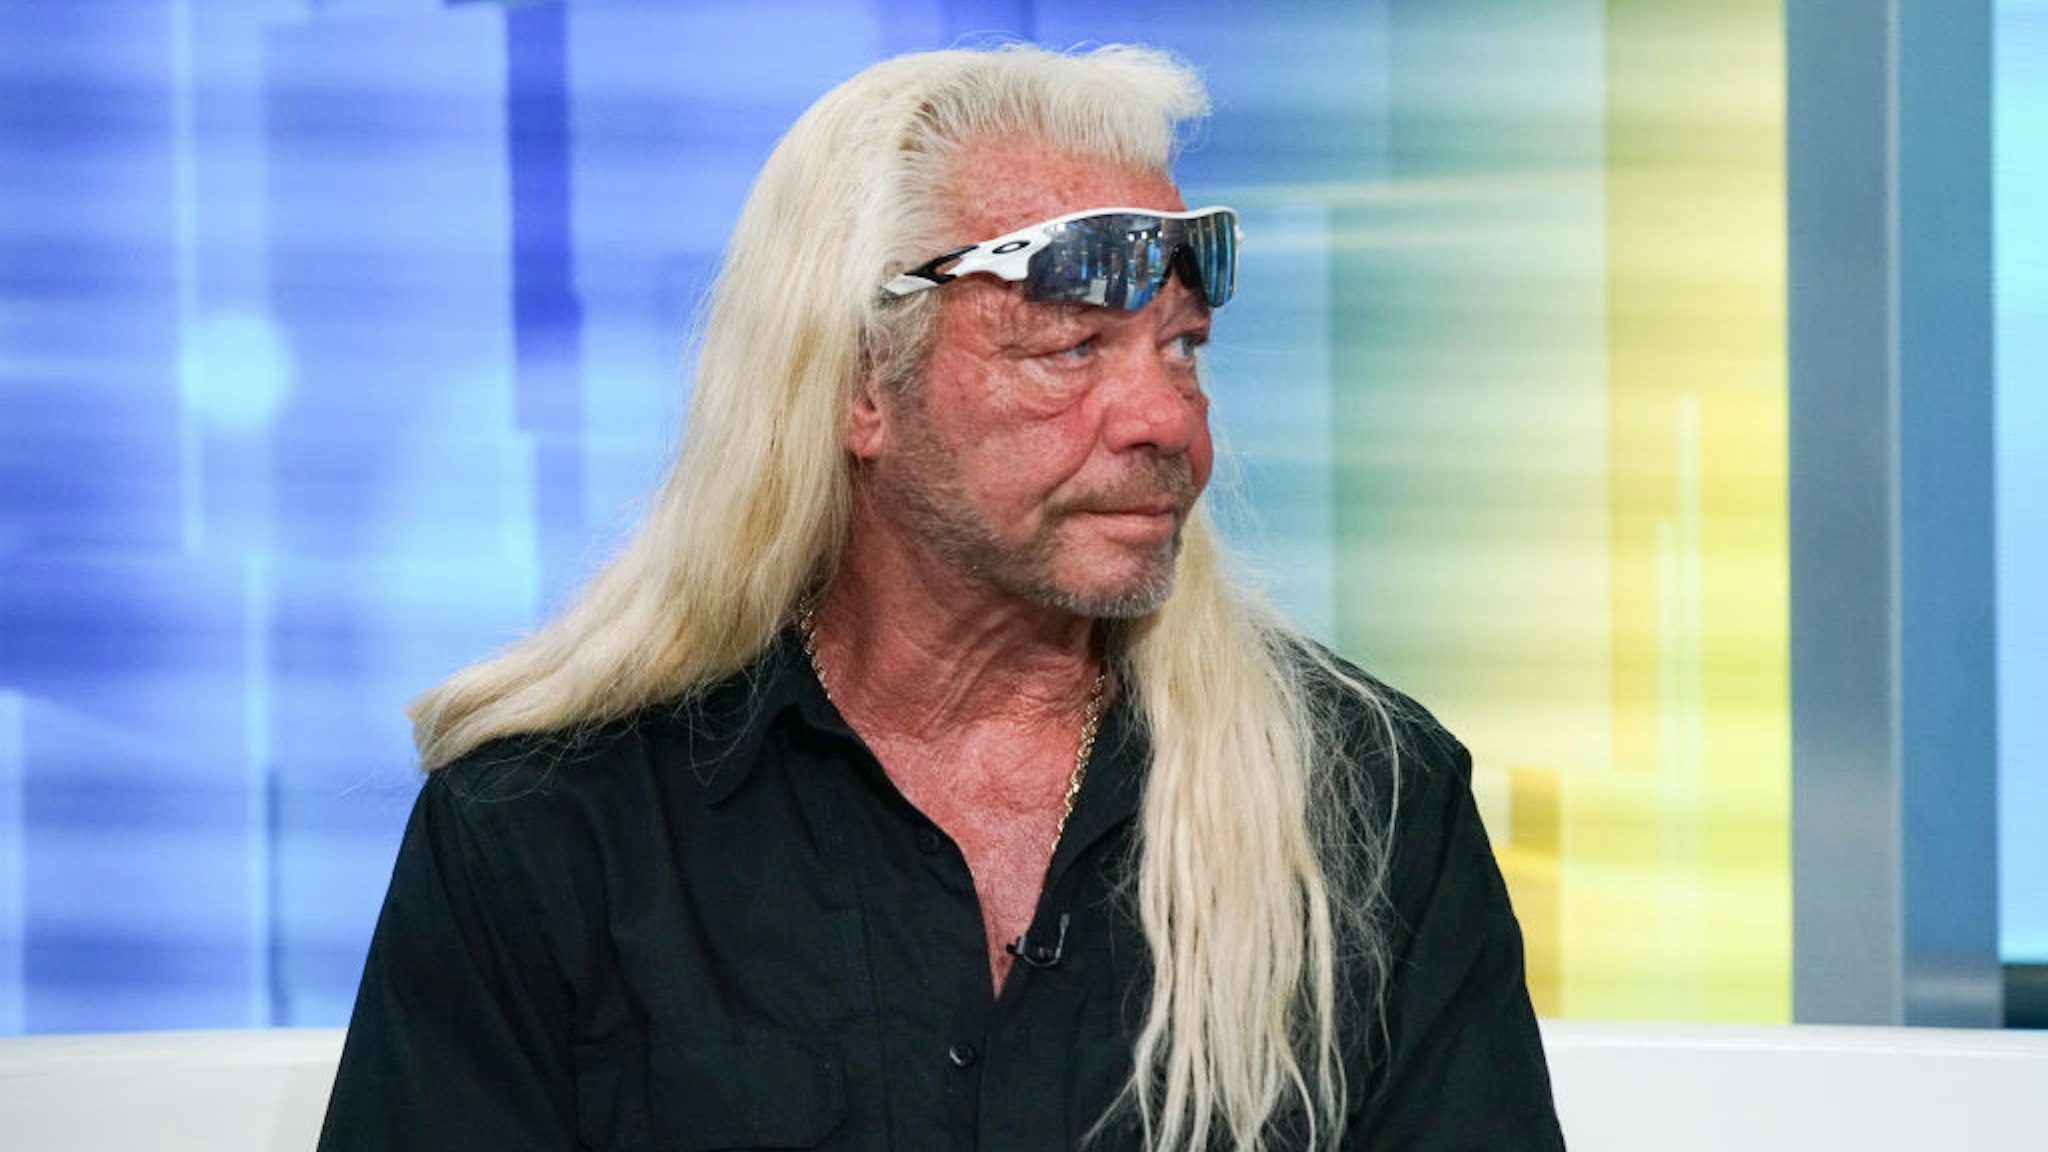 TV personality Duane Chapman aka Dog the Bounty Hunter visits "FOX & Friends" at FOX Studios on August 28, 2019 in New York City.